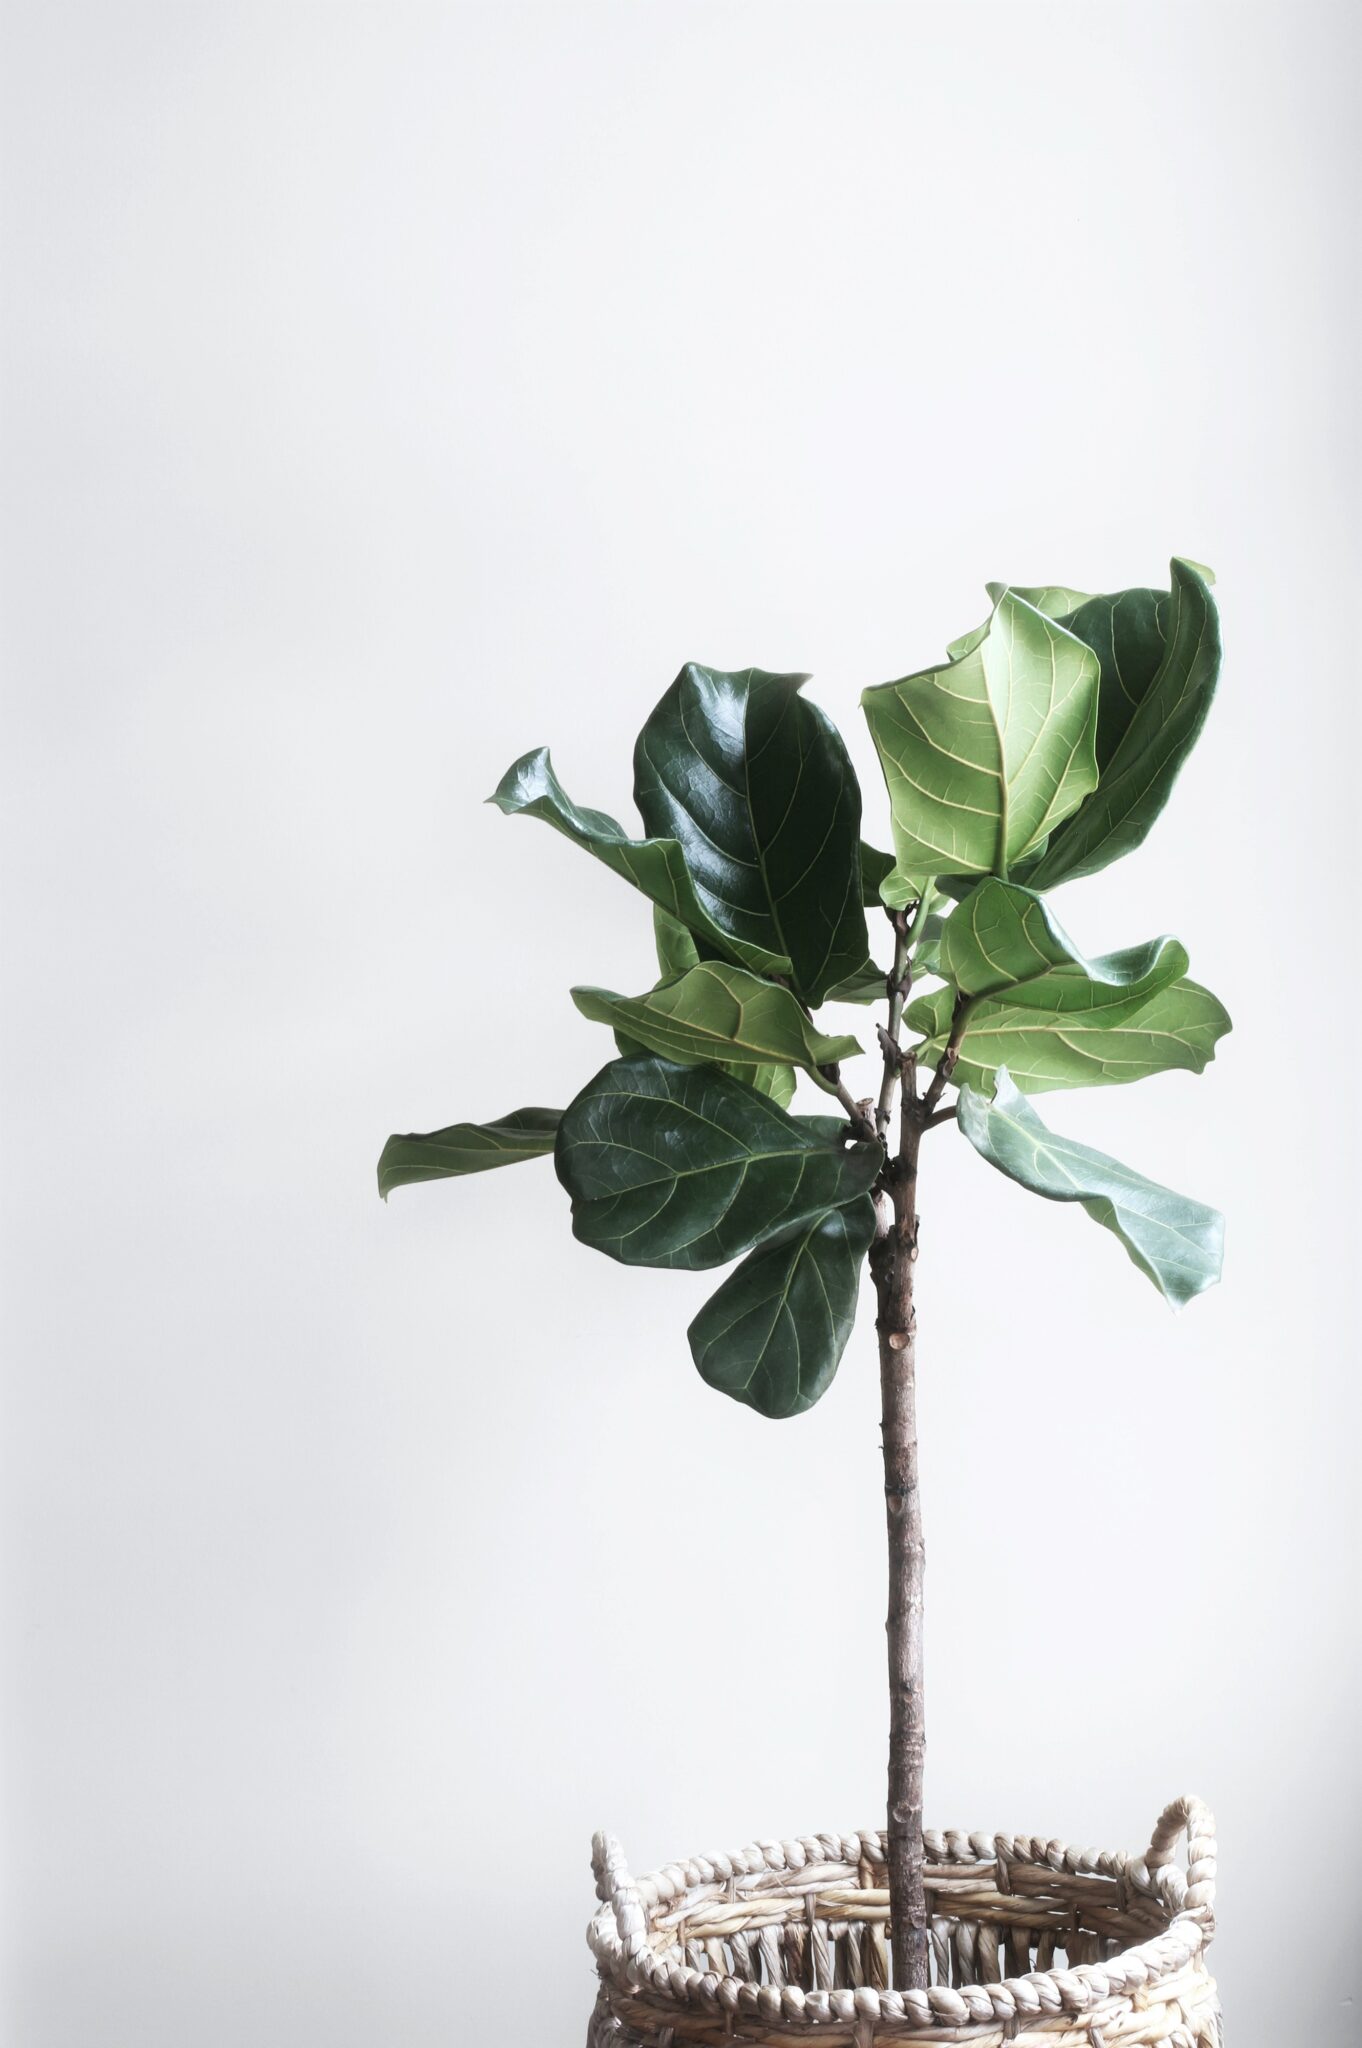 A beautiful fig tree is shown against a light grey wall. This article covers the top things that are necessary for a sustainable life.